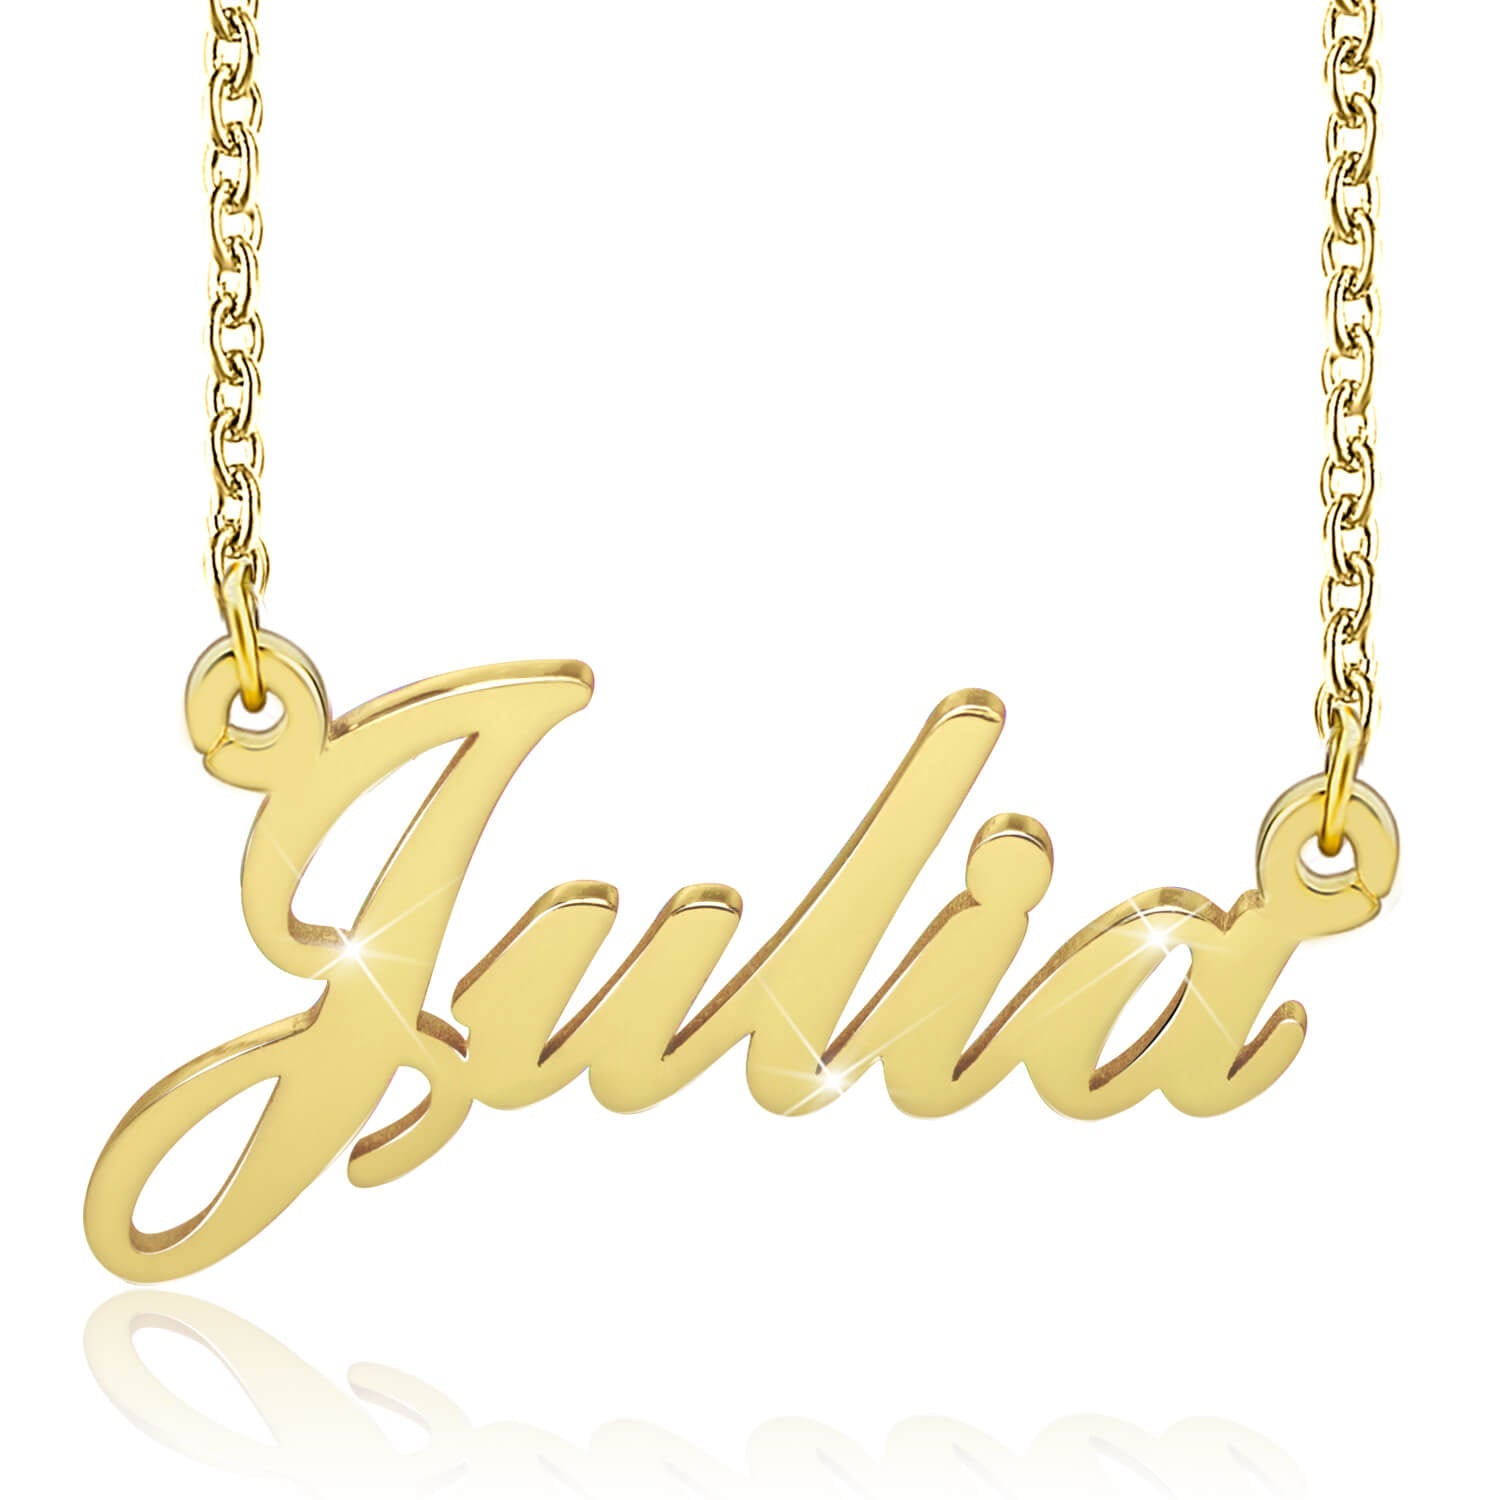 Classic Personalized Gold Plated Name Necklace O Chain For Girls Women-silviax